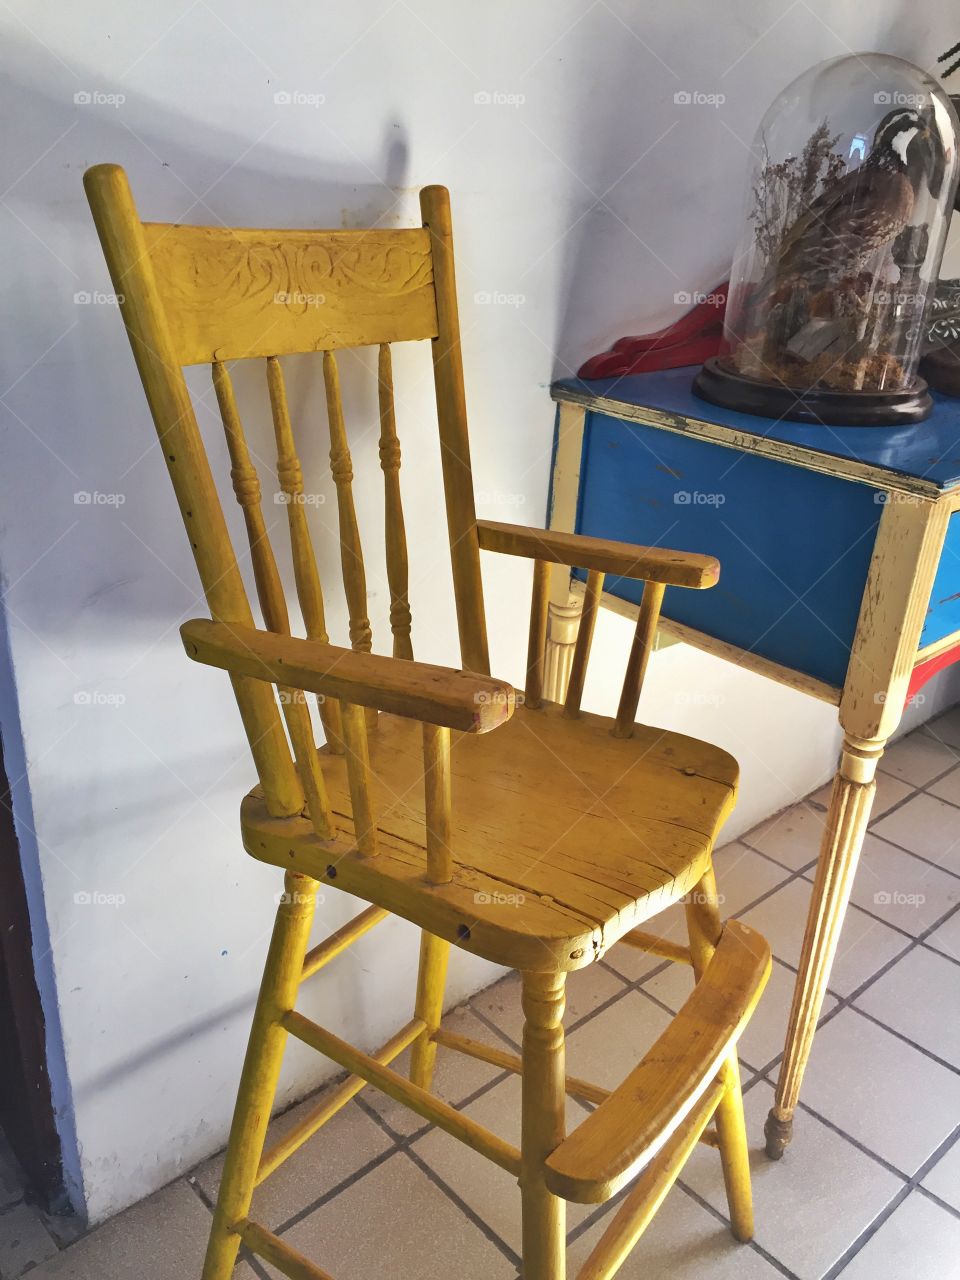 Vintage yellow chair